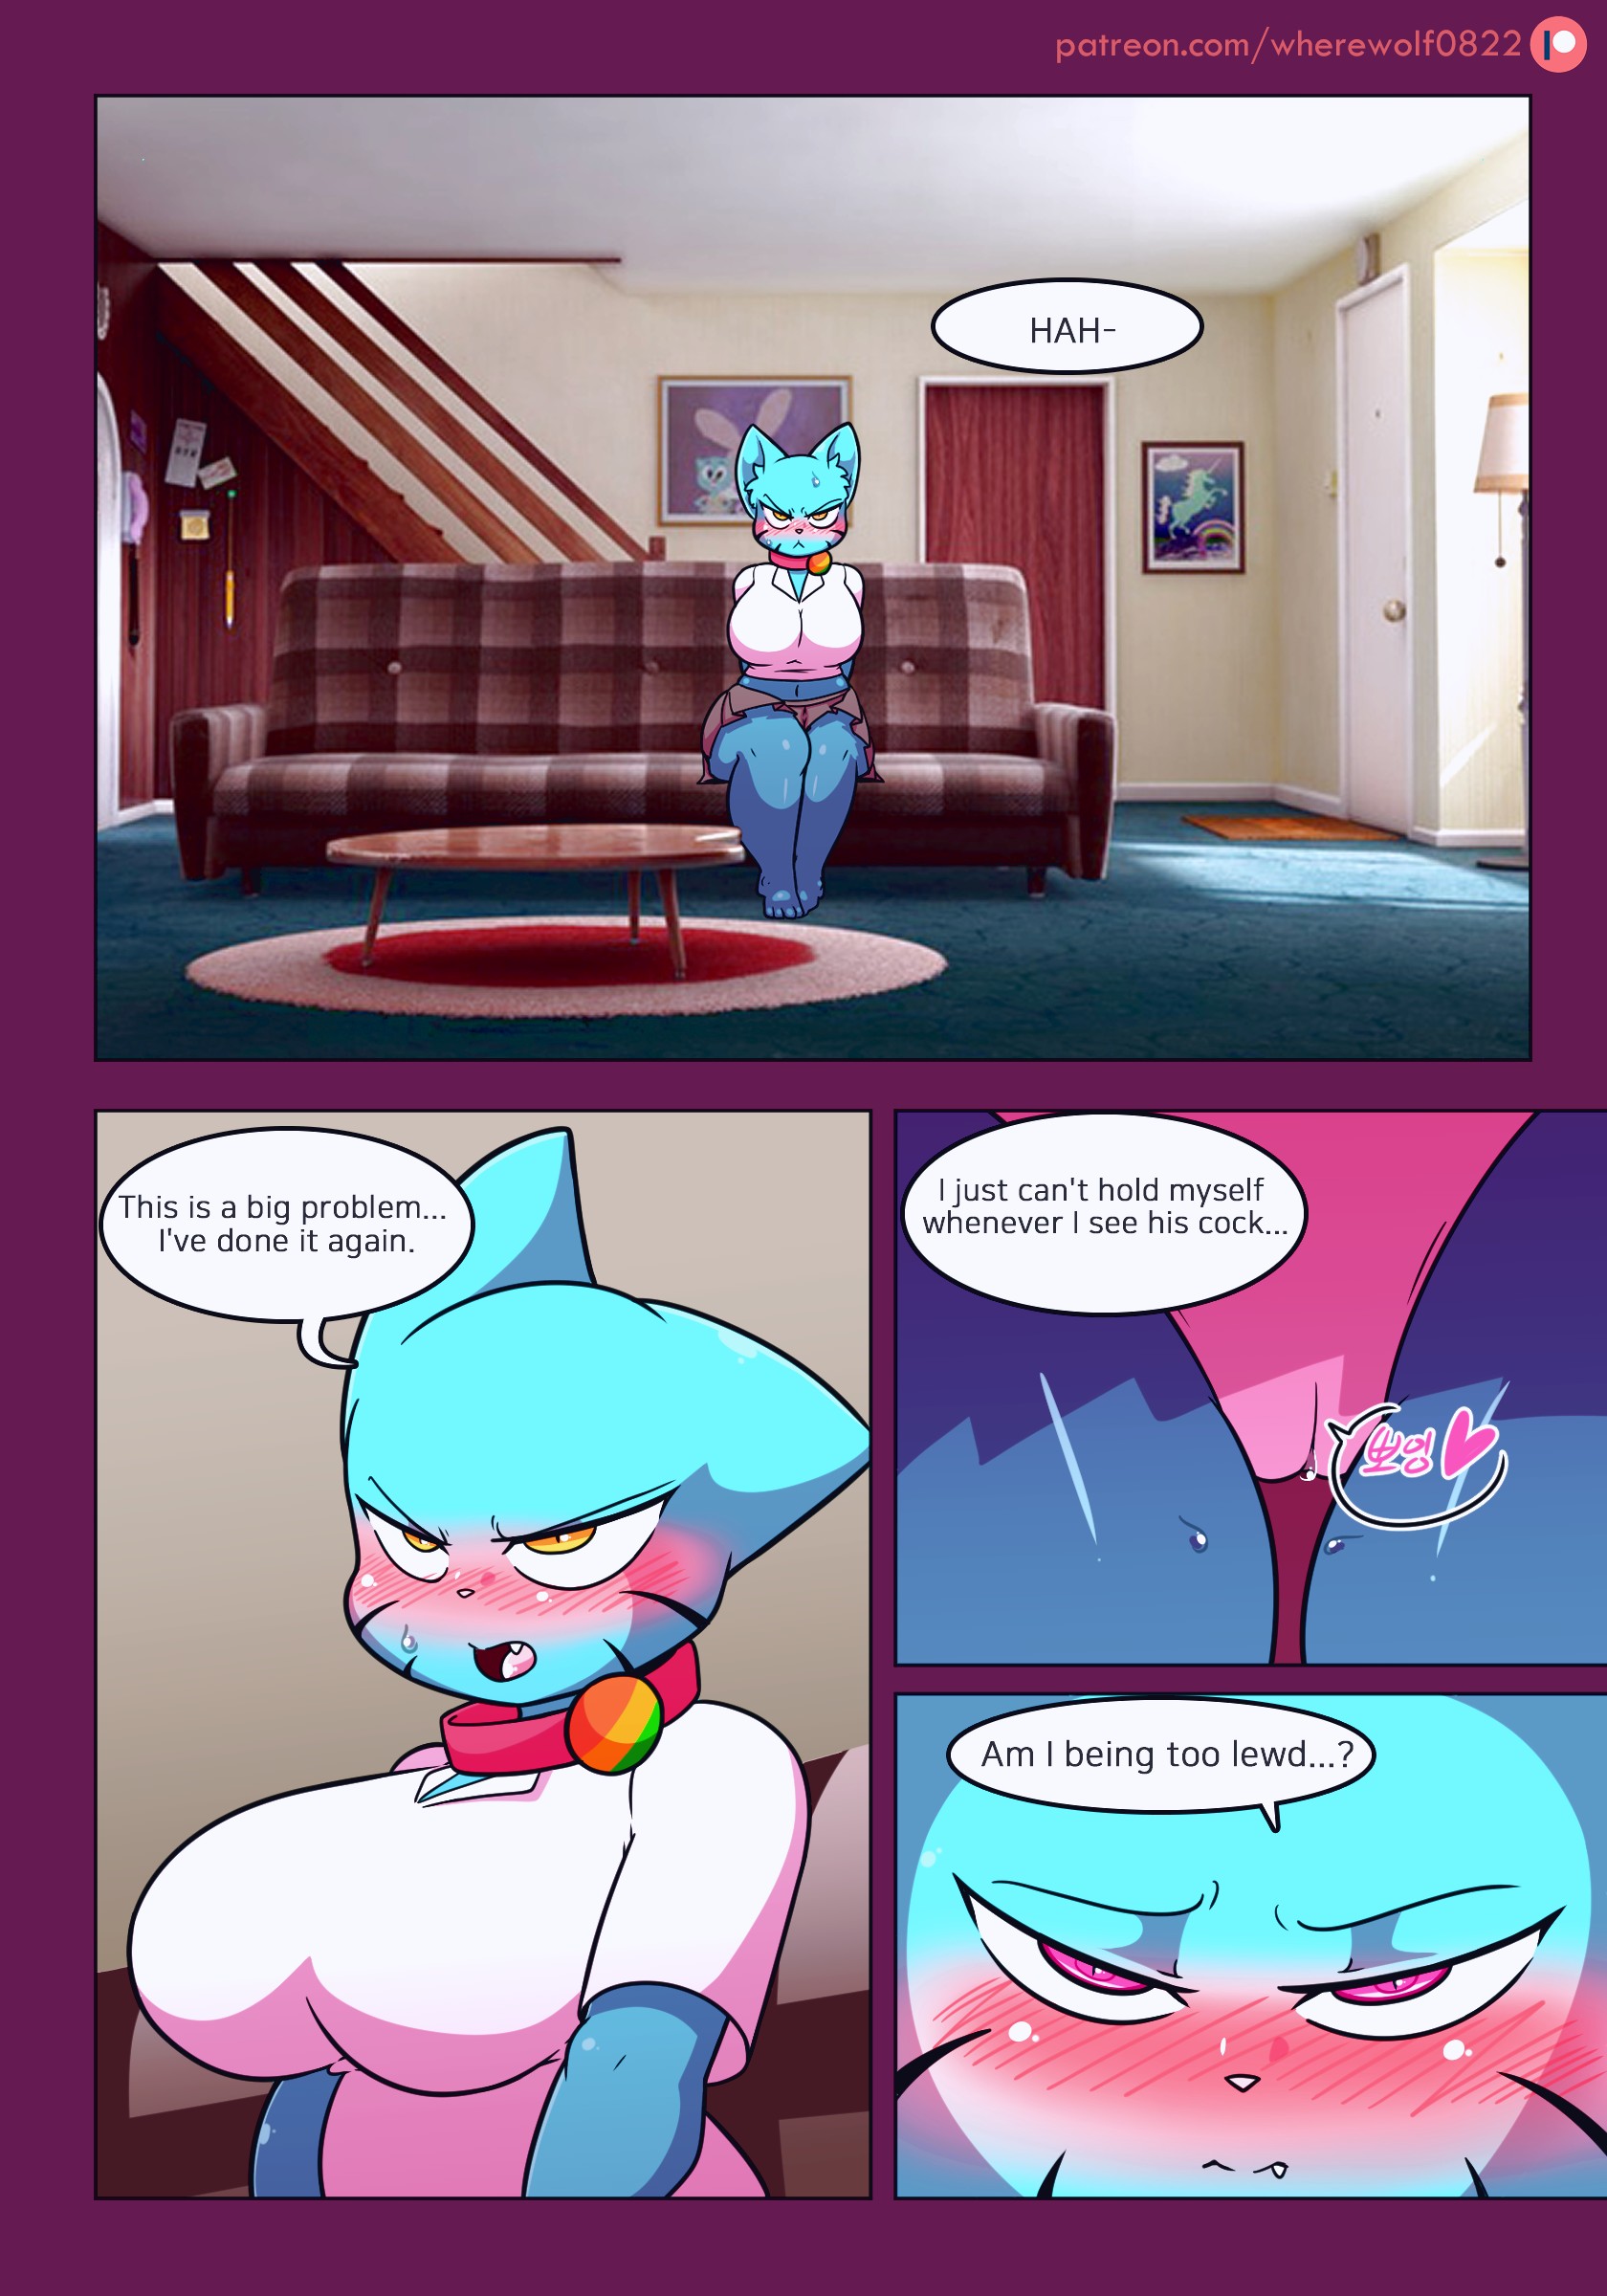 Lusty World of Nicole 2 - Angel porn comic page 01 on category The Amazing World of Gumball